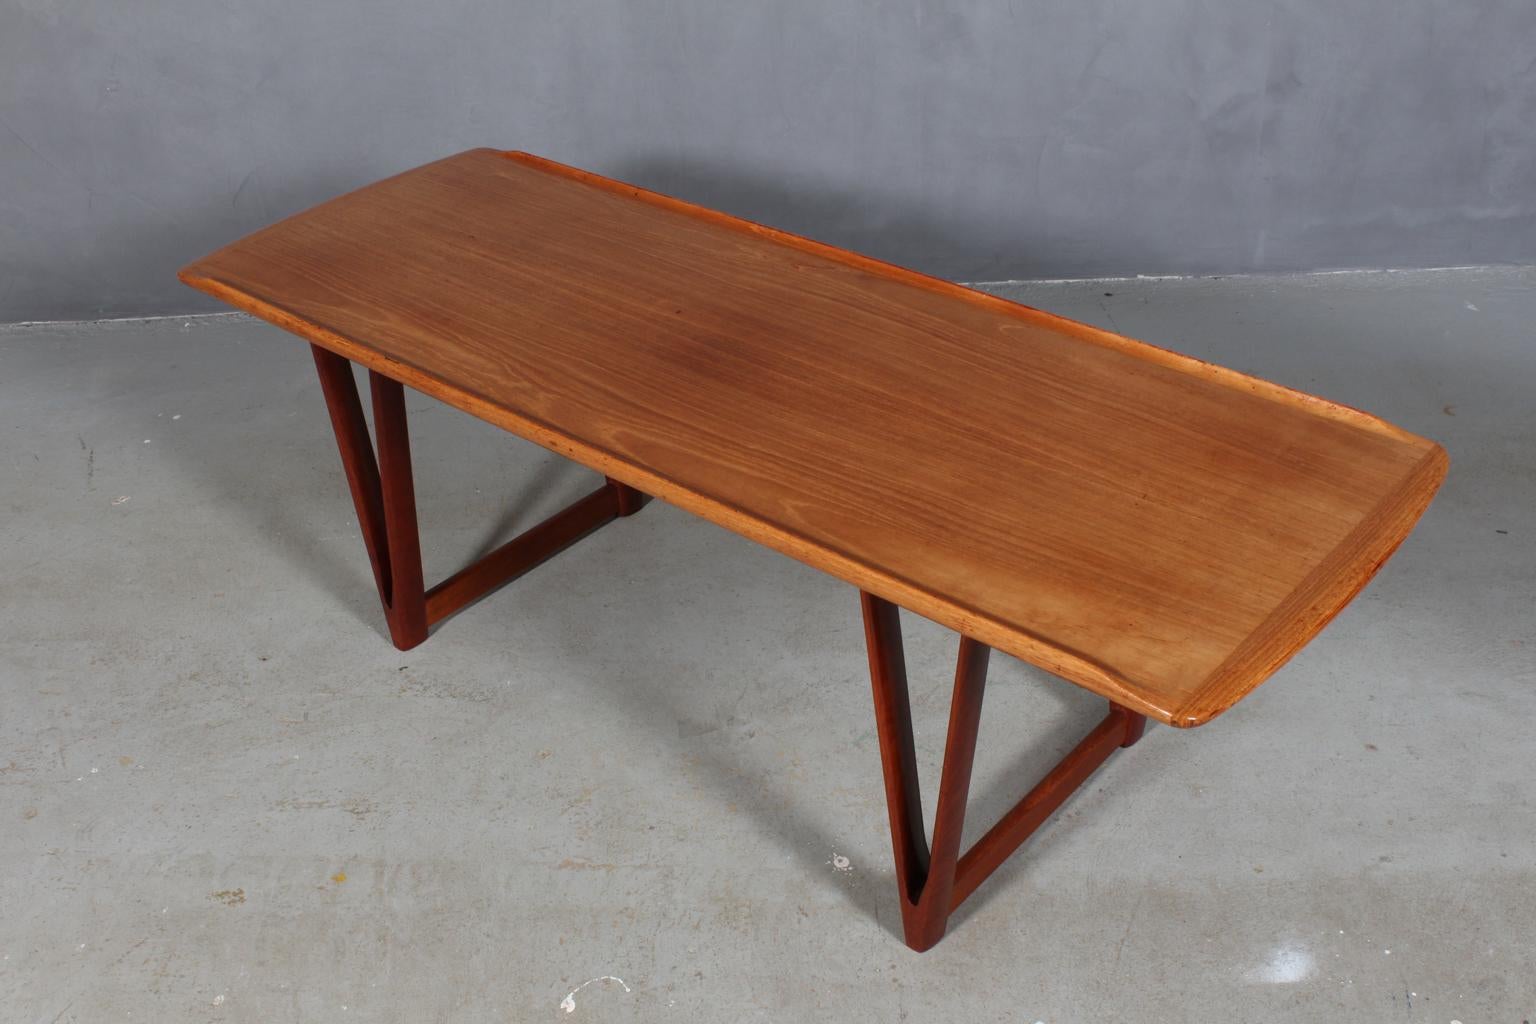 Kurt Østervig coffee table with veneered teak plate with great details.

V sculpted legs in solid teak.

Probably made by Jason Møbler in the 1960s.

Can easy be disassembled for easy shipping.